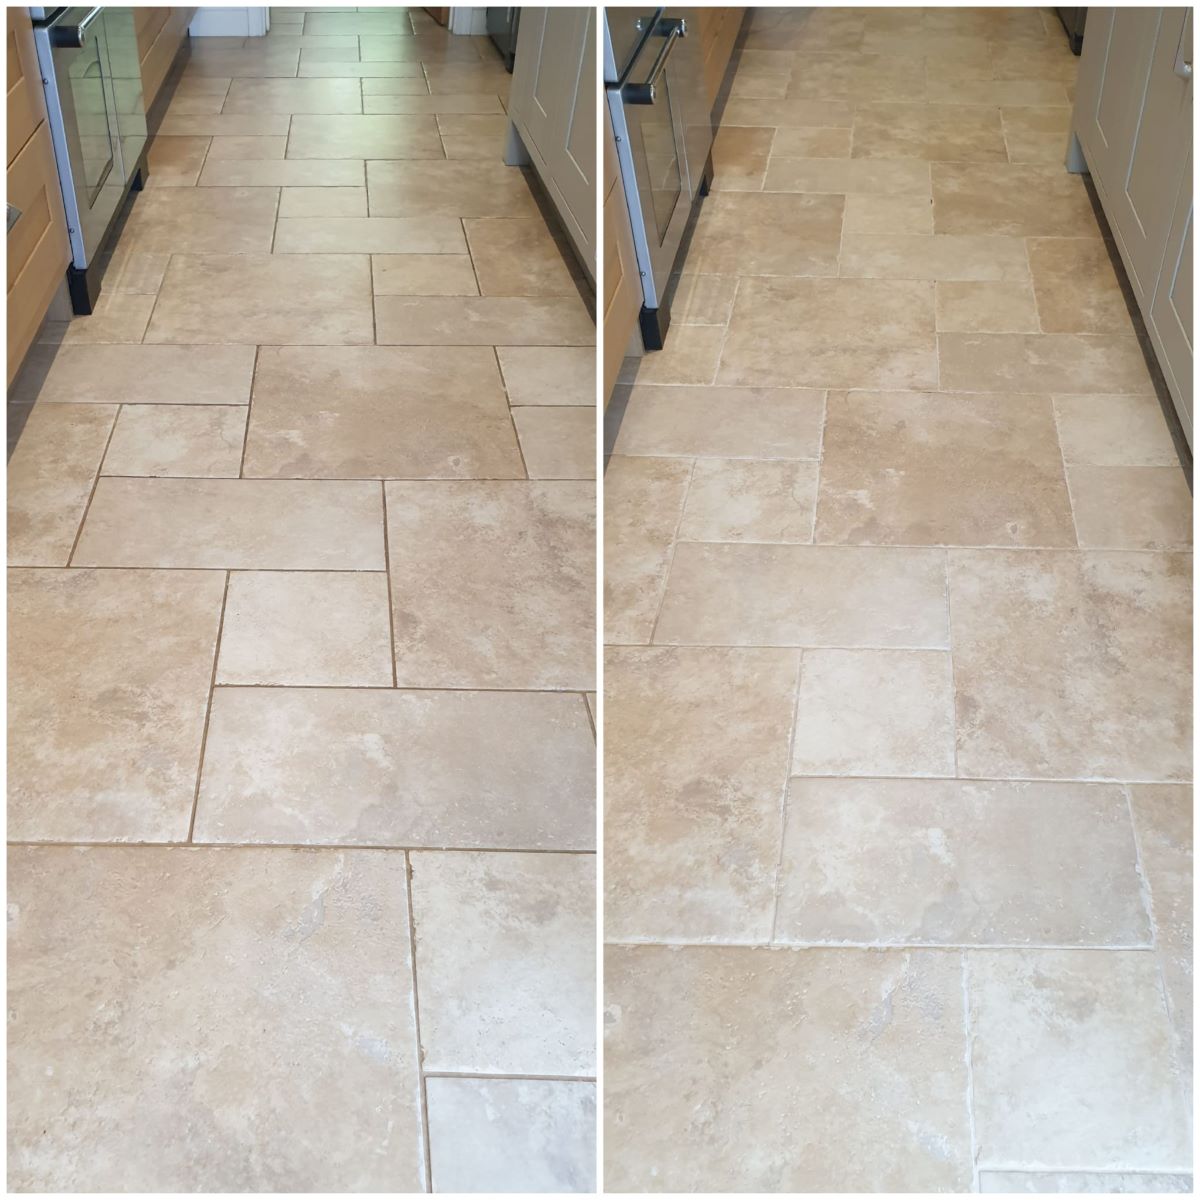 Hard floor cleaning before and after image